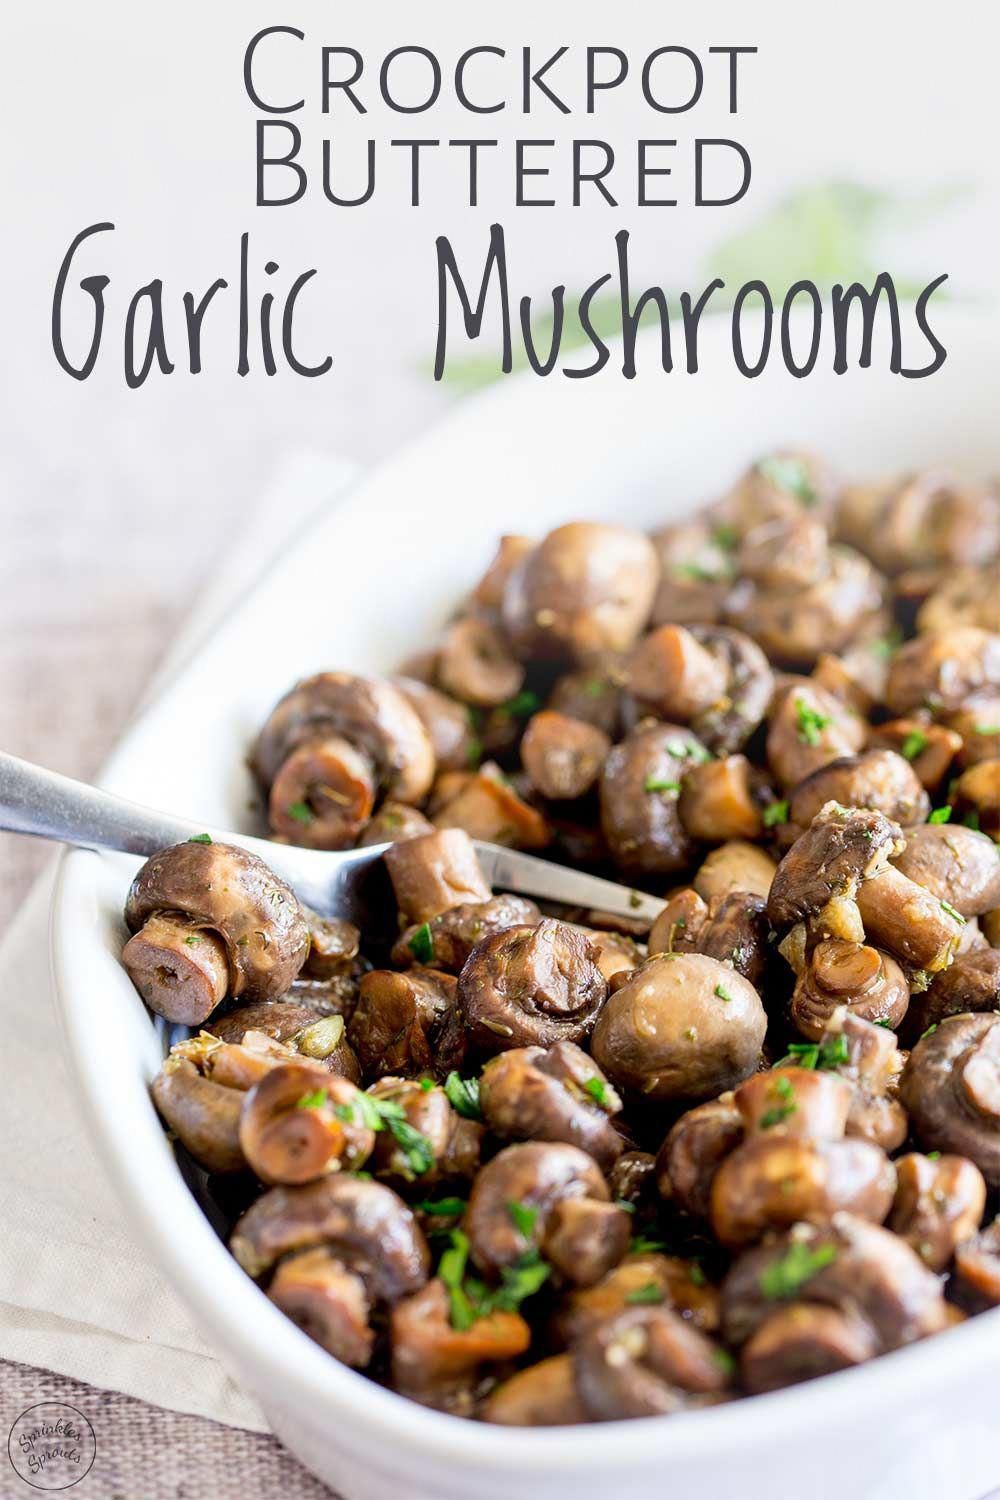 Crockpot Buttered Garlic Mushrooms | Sprinkles and Sprouts -   19 thanksgiving sides healthy crockpot ideas